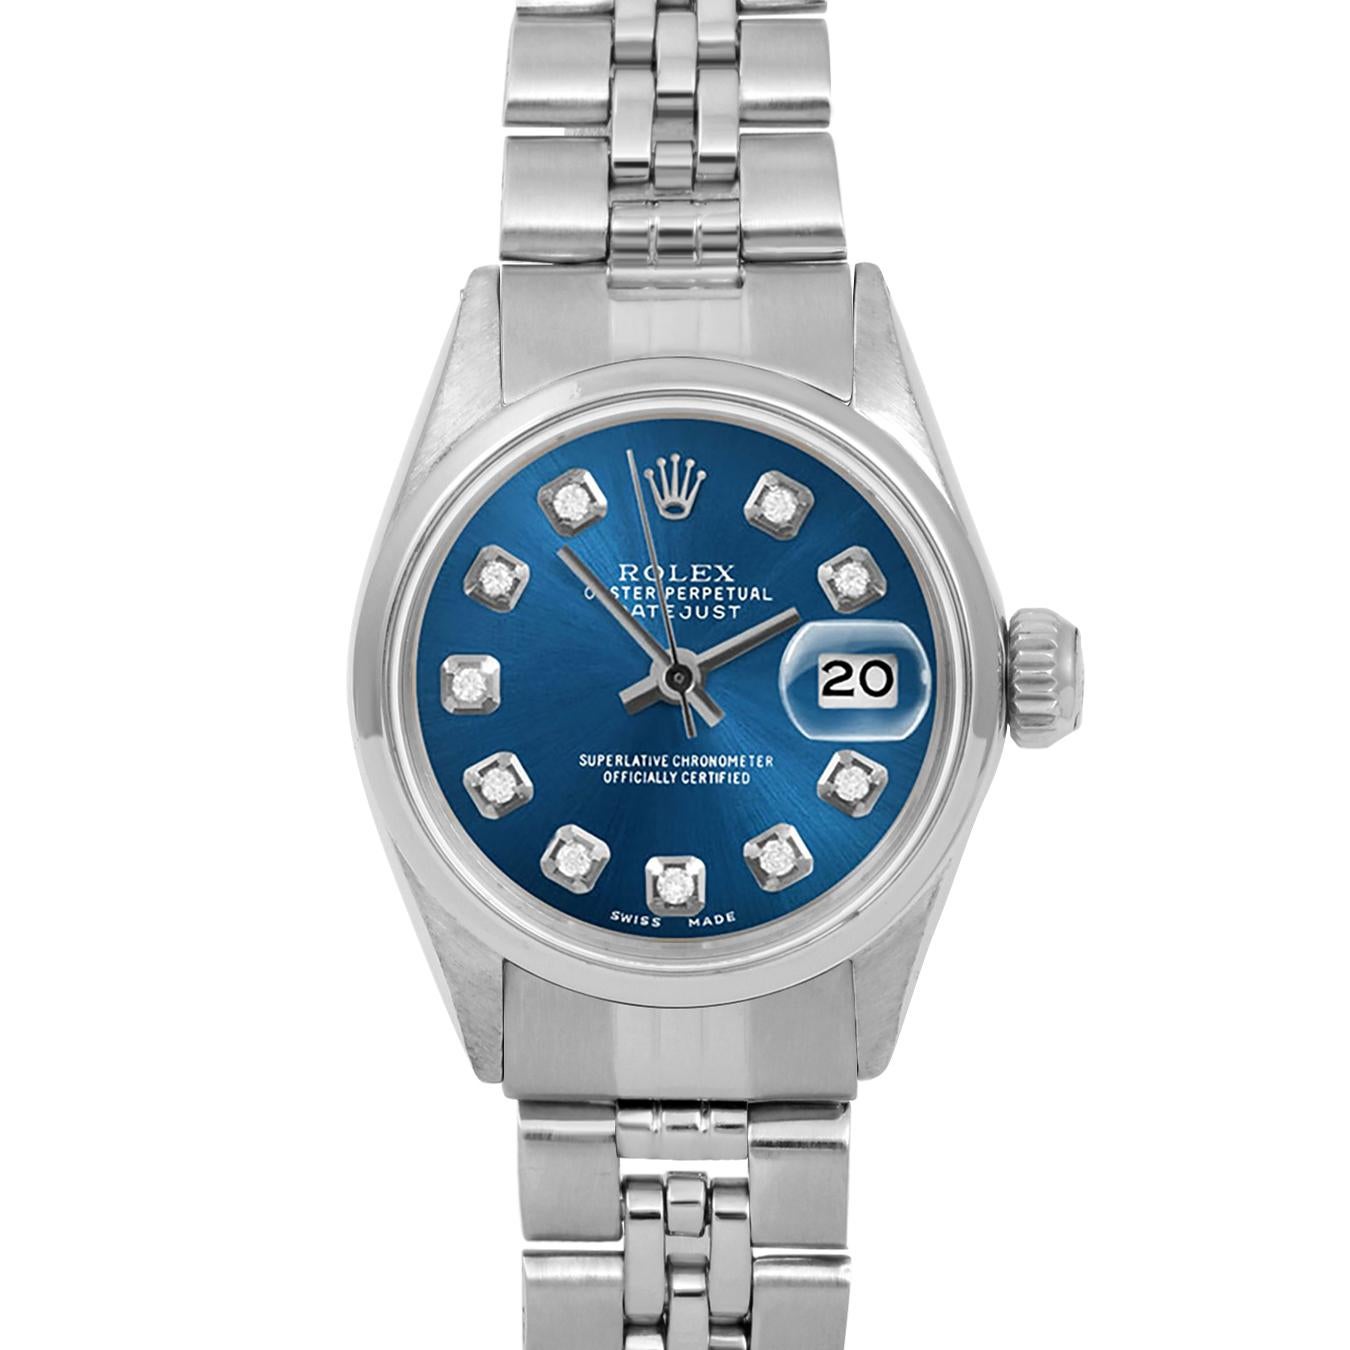 Brand : Rolex
Model : Datejust (Non-Quickset Model)
Gender : Ladies
Metals : Stainless Steel
Case Size : 24 mm

Dial : Custom Blue Diamond Dial (This dial is not original Rolex And has been added aftermarket yet is a beautiful Custom